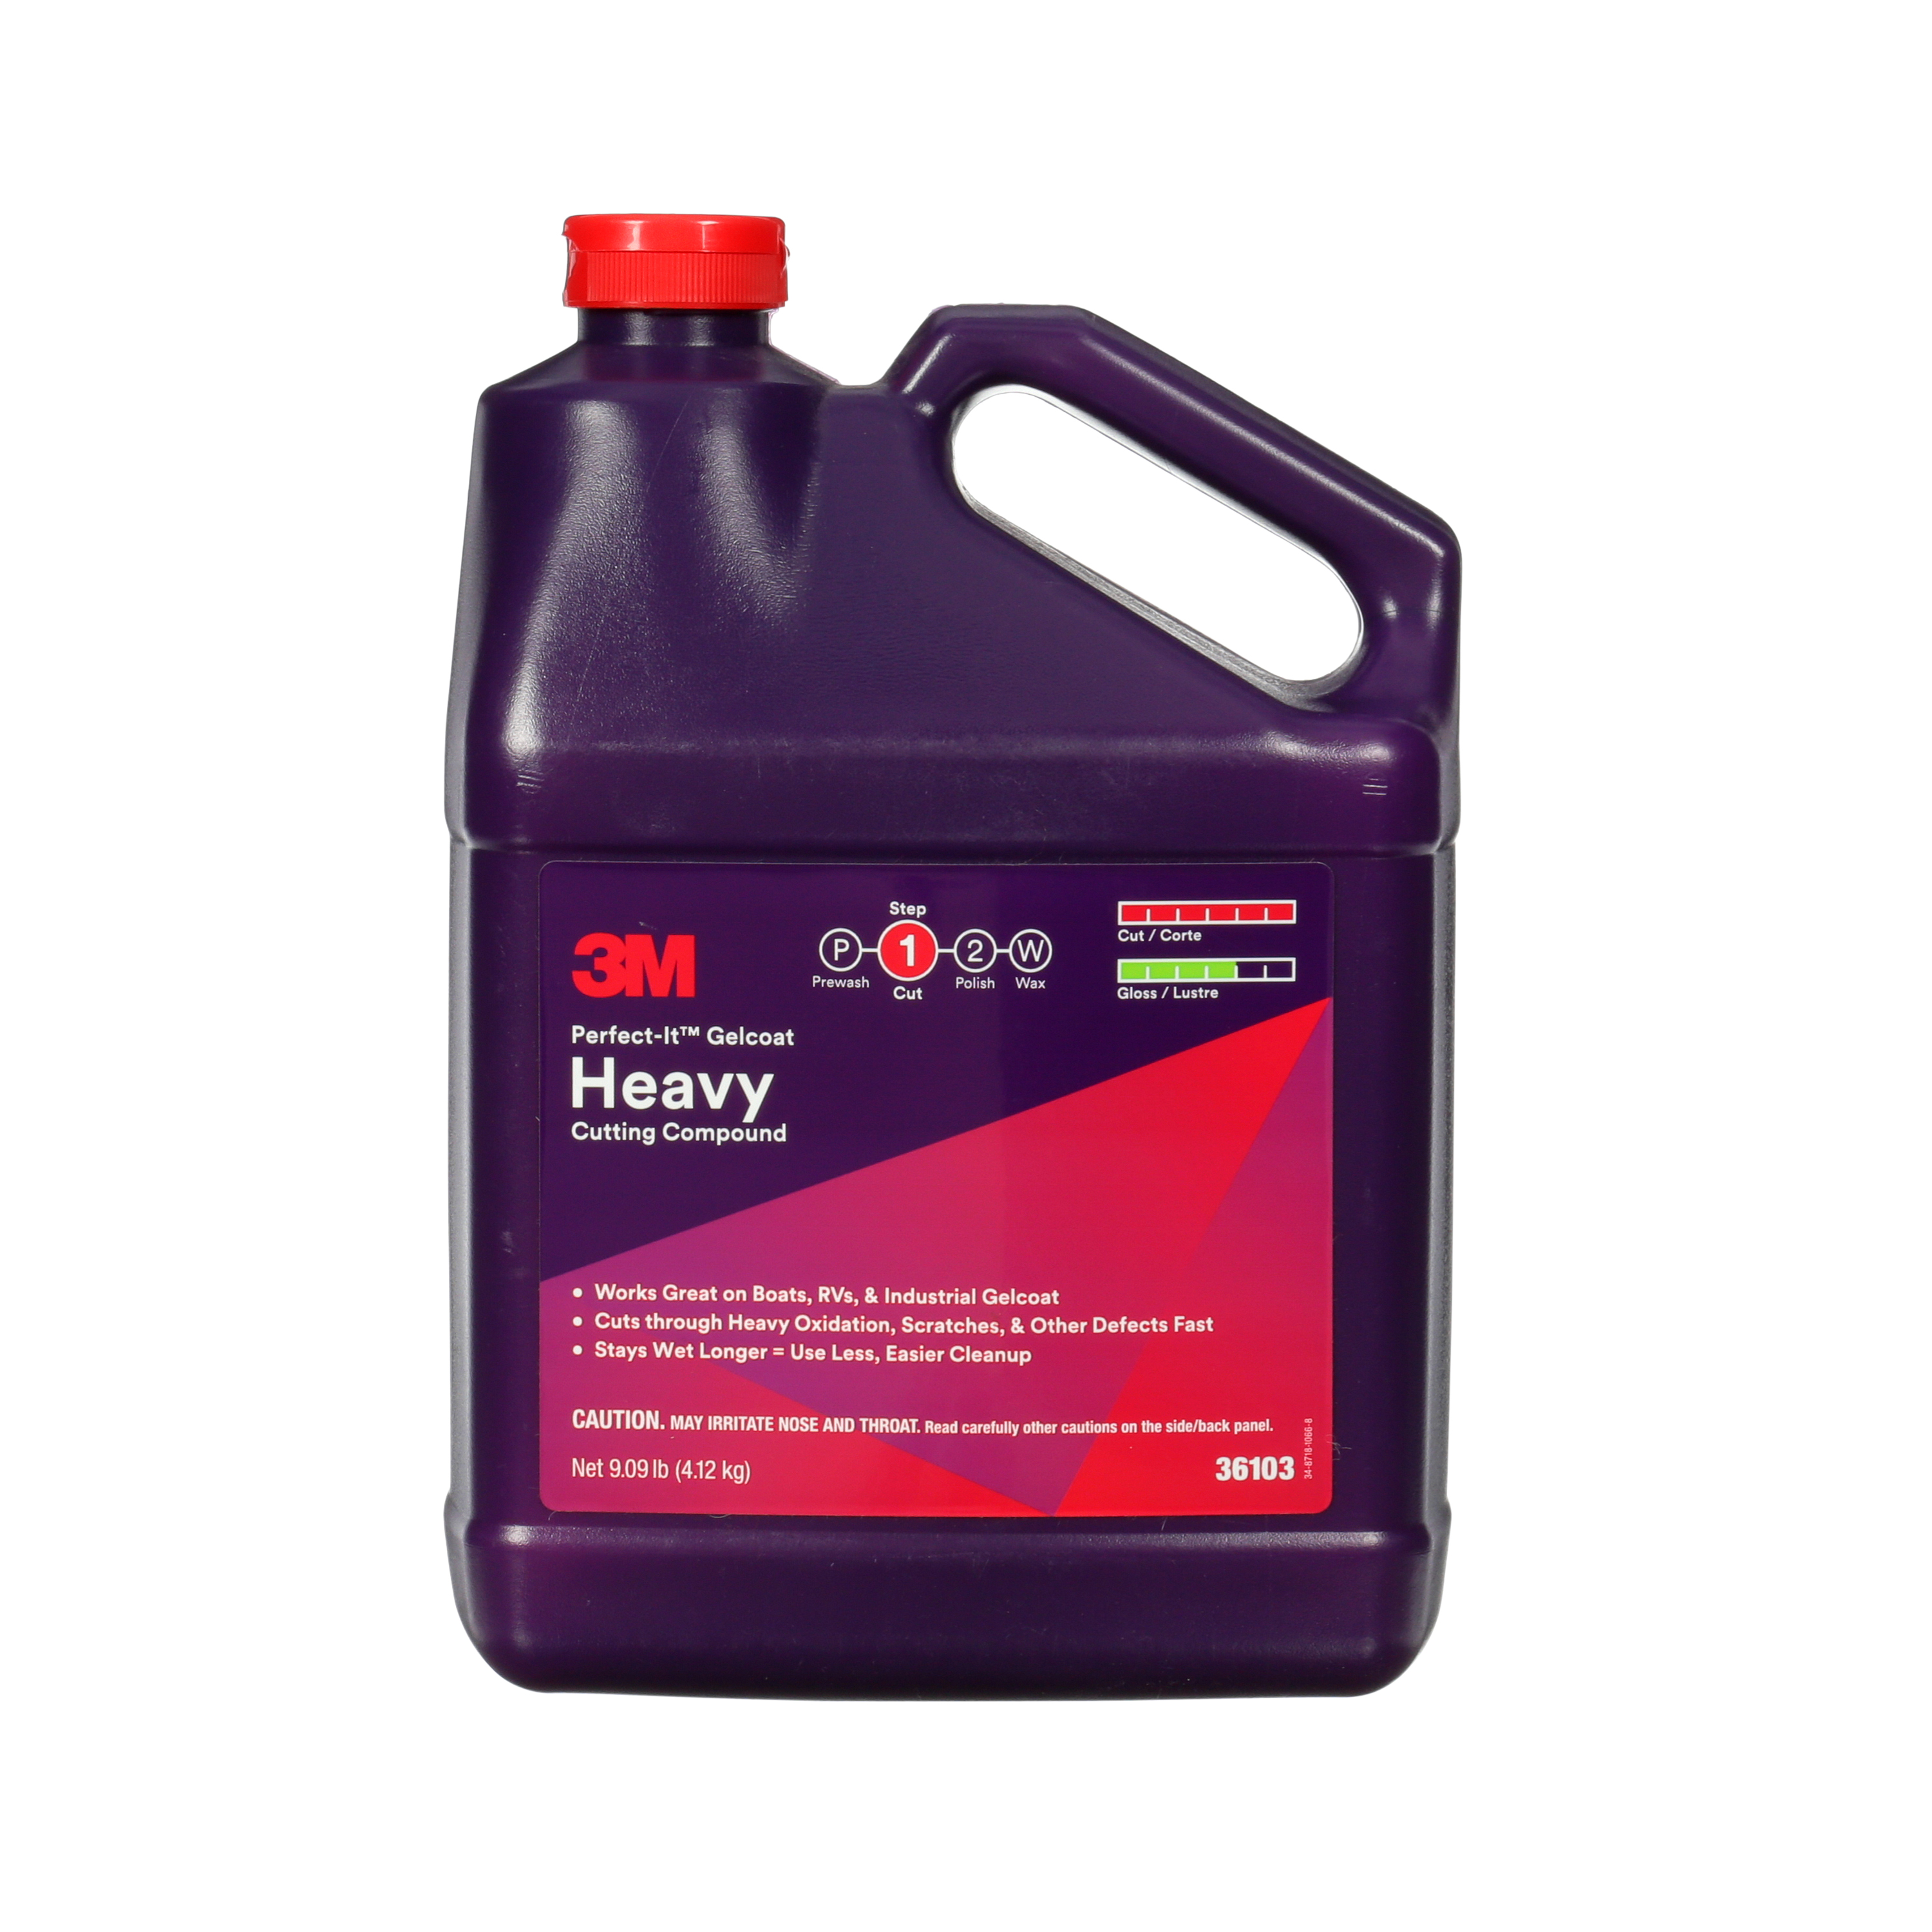 3M 36103 - Perfect-It 1 gal. Gelcoat Heavy Cutting Compound